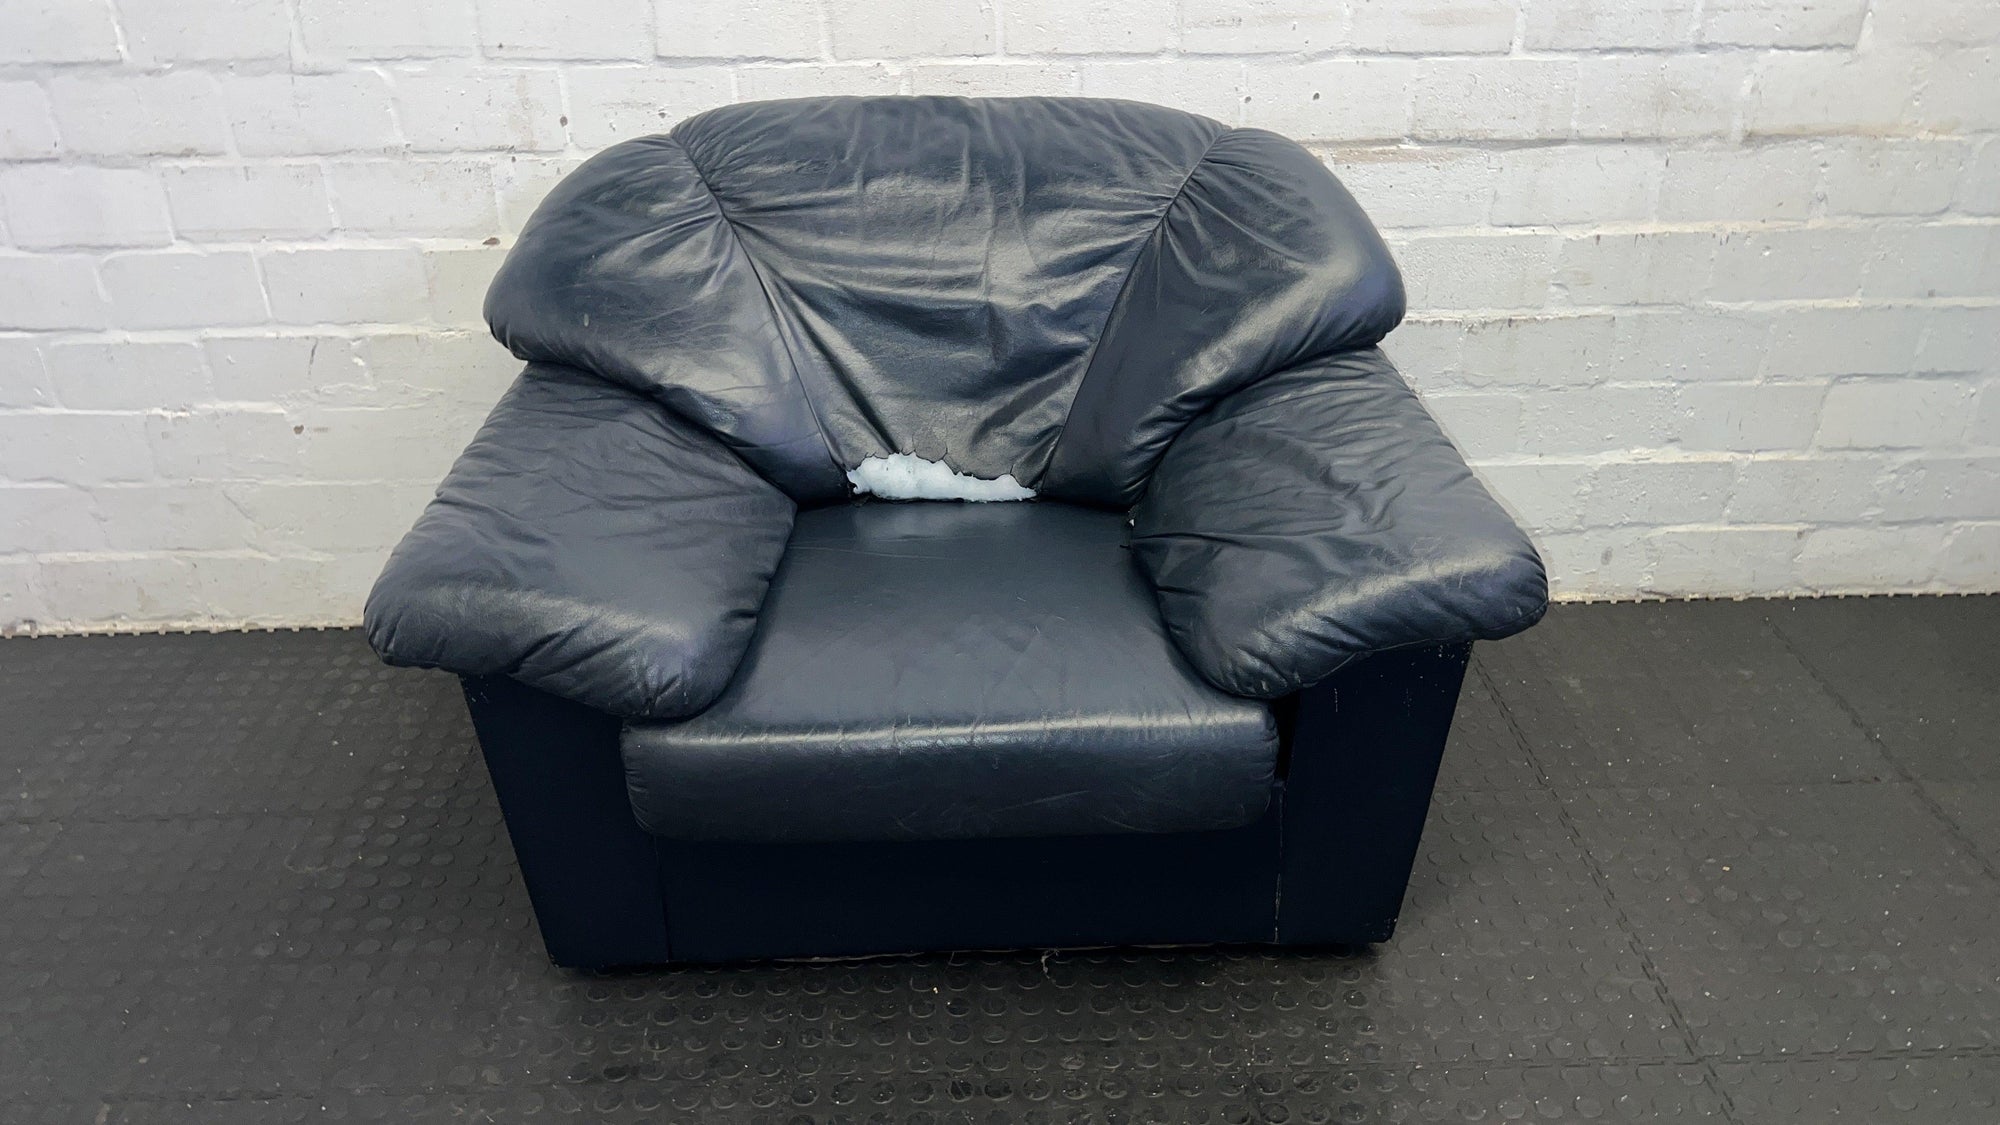 Black Pleather 1 Seater Couch (Damage & Peeling of Pleather) - REDUCED